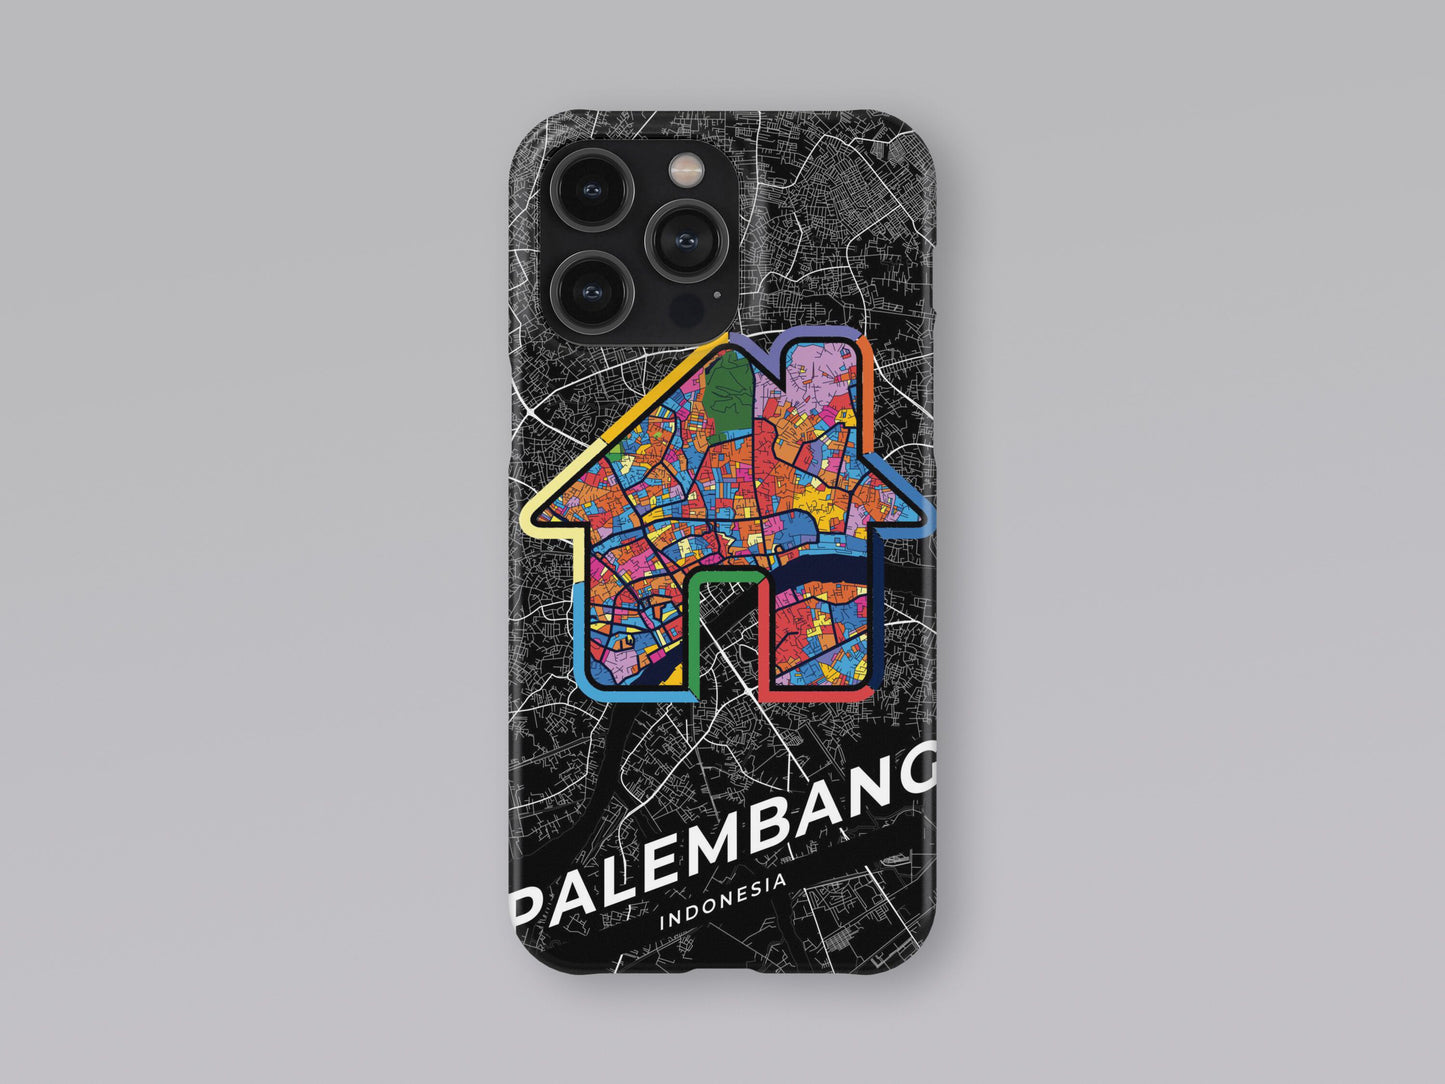 Palembang Indonesia slim phone case with colorful icon 3